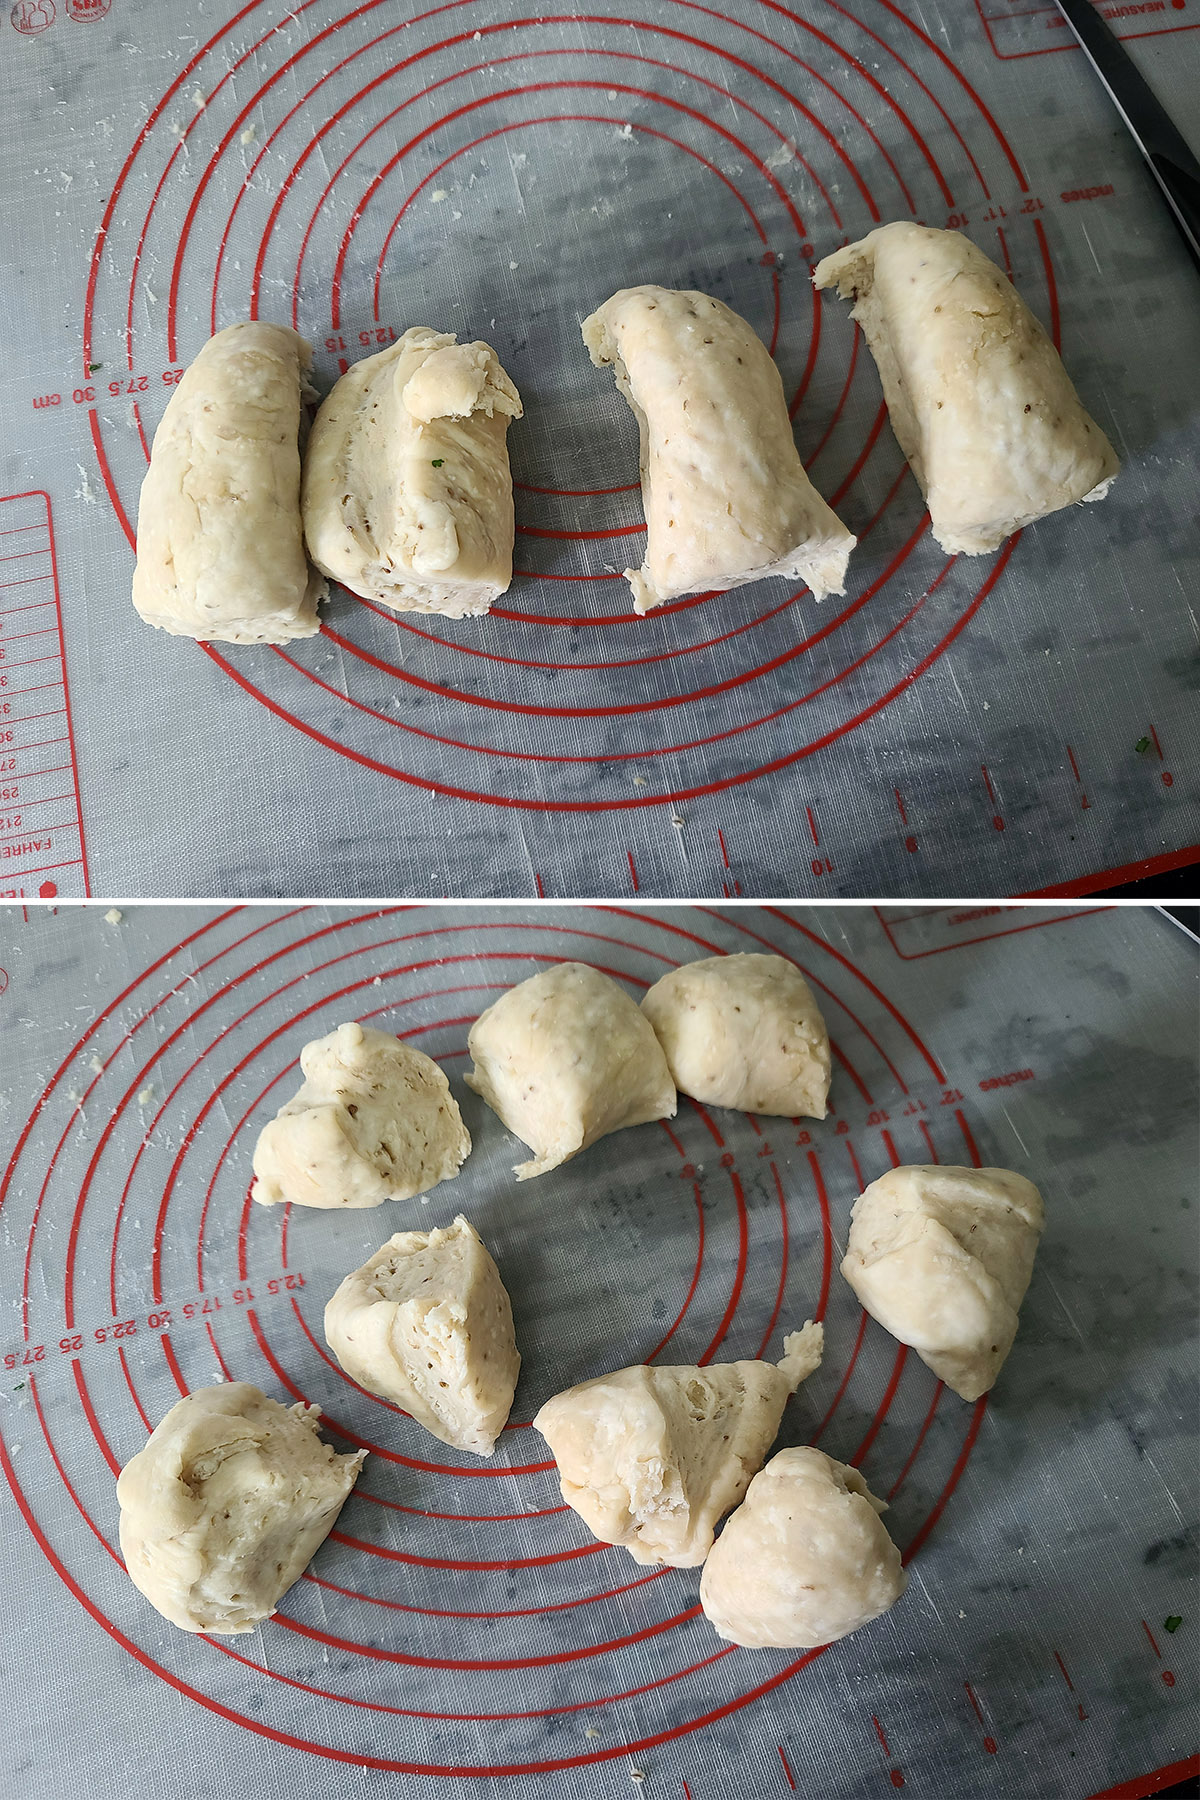 A 2 part image showing the dough divided into 4 pieces, then 8 pieces.